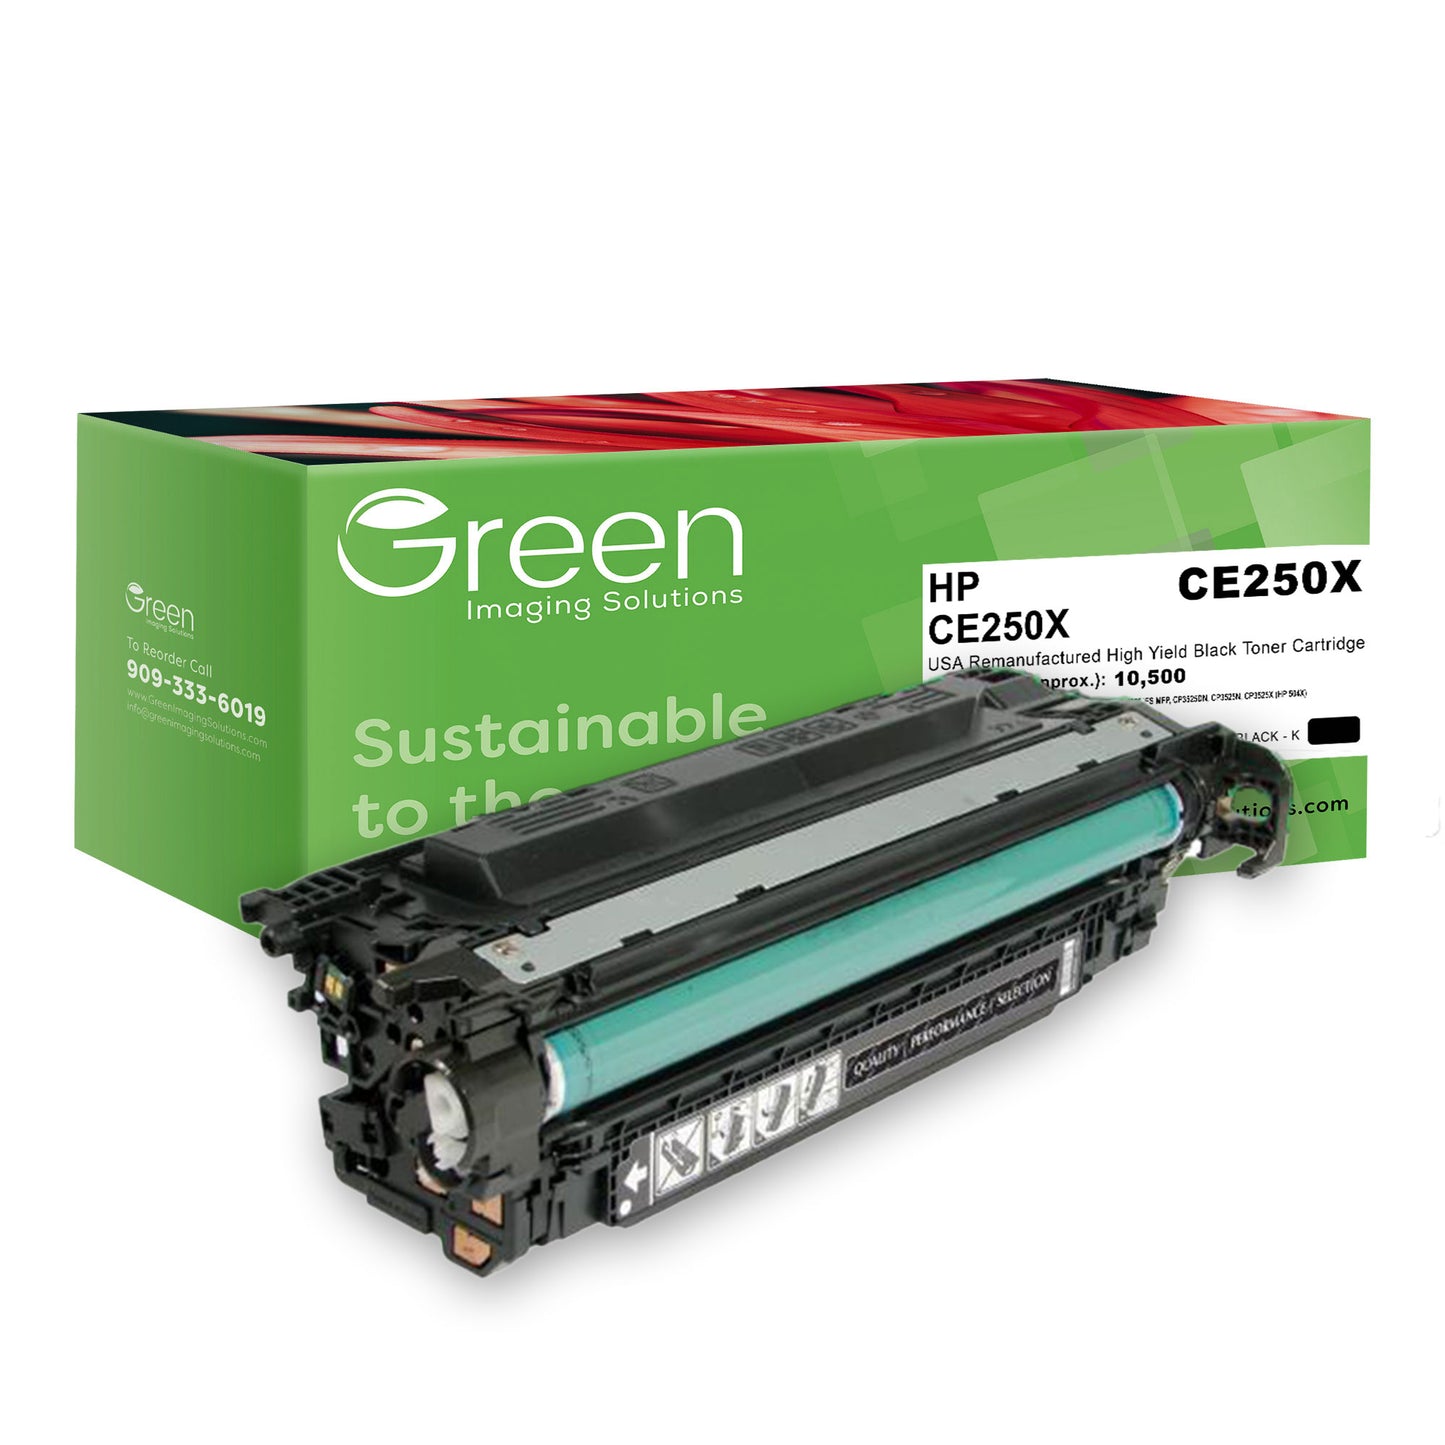 GIS USA Remanufactured High Yield Black Toner Cartridge for HP CE250X (HP 504X)